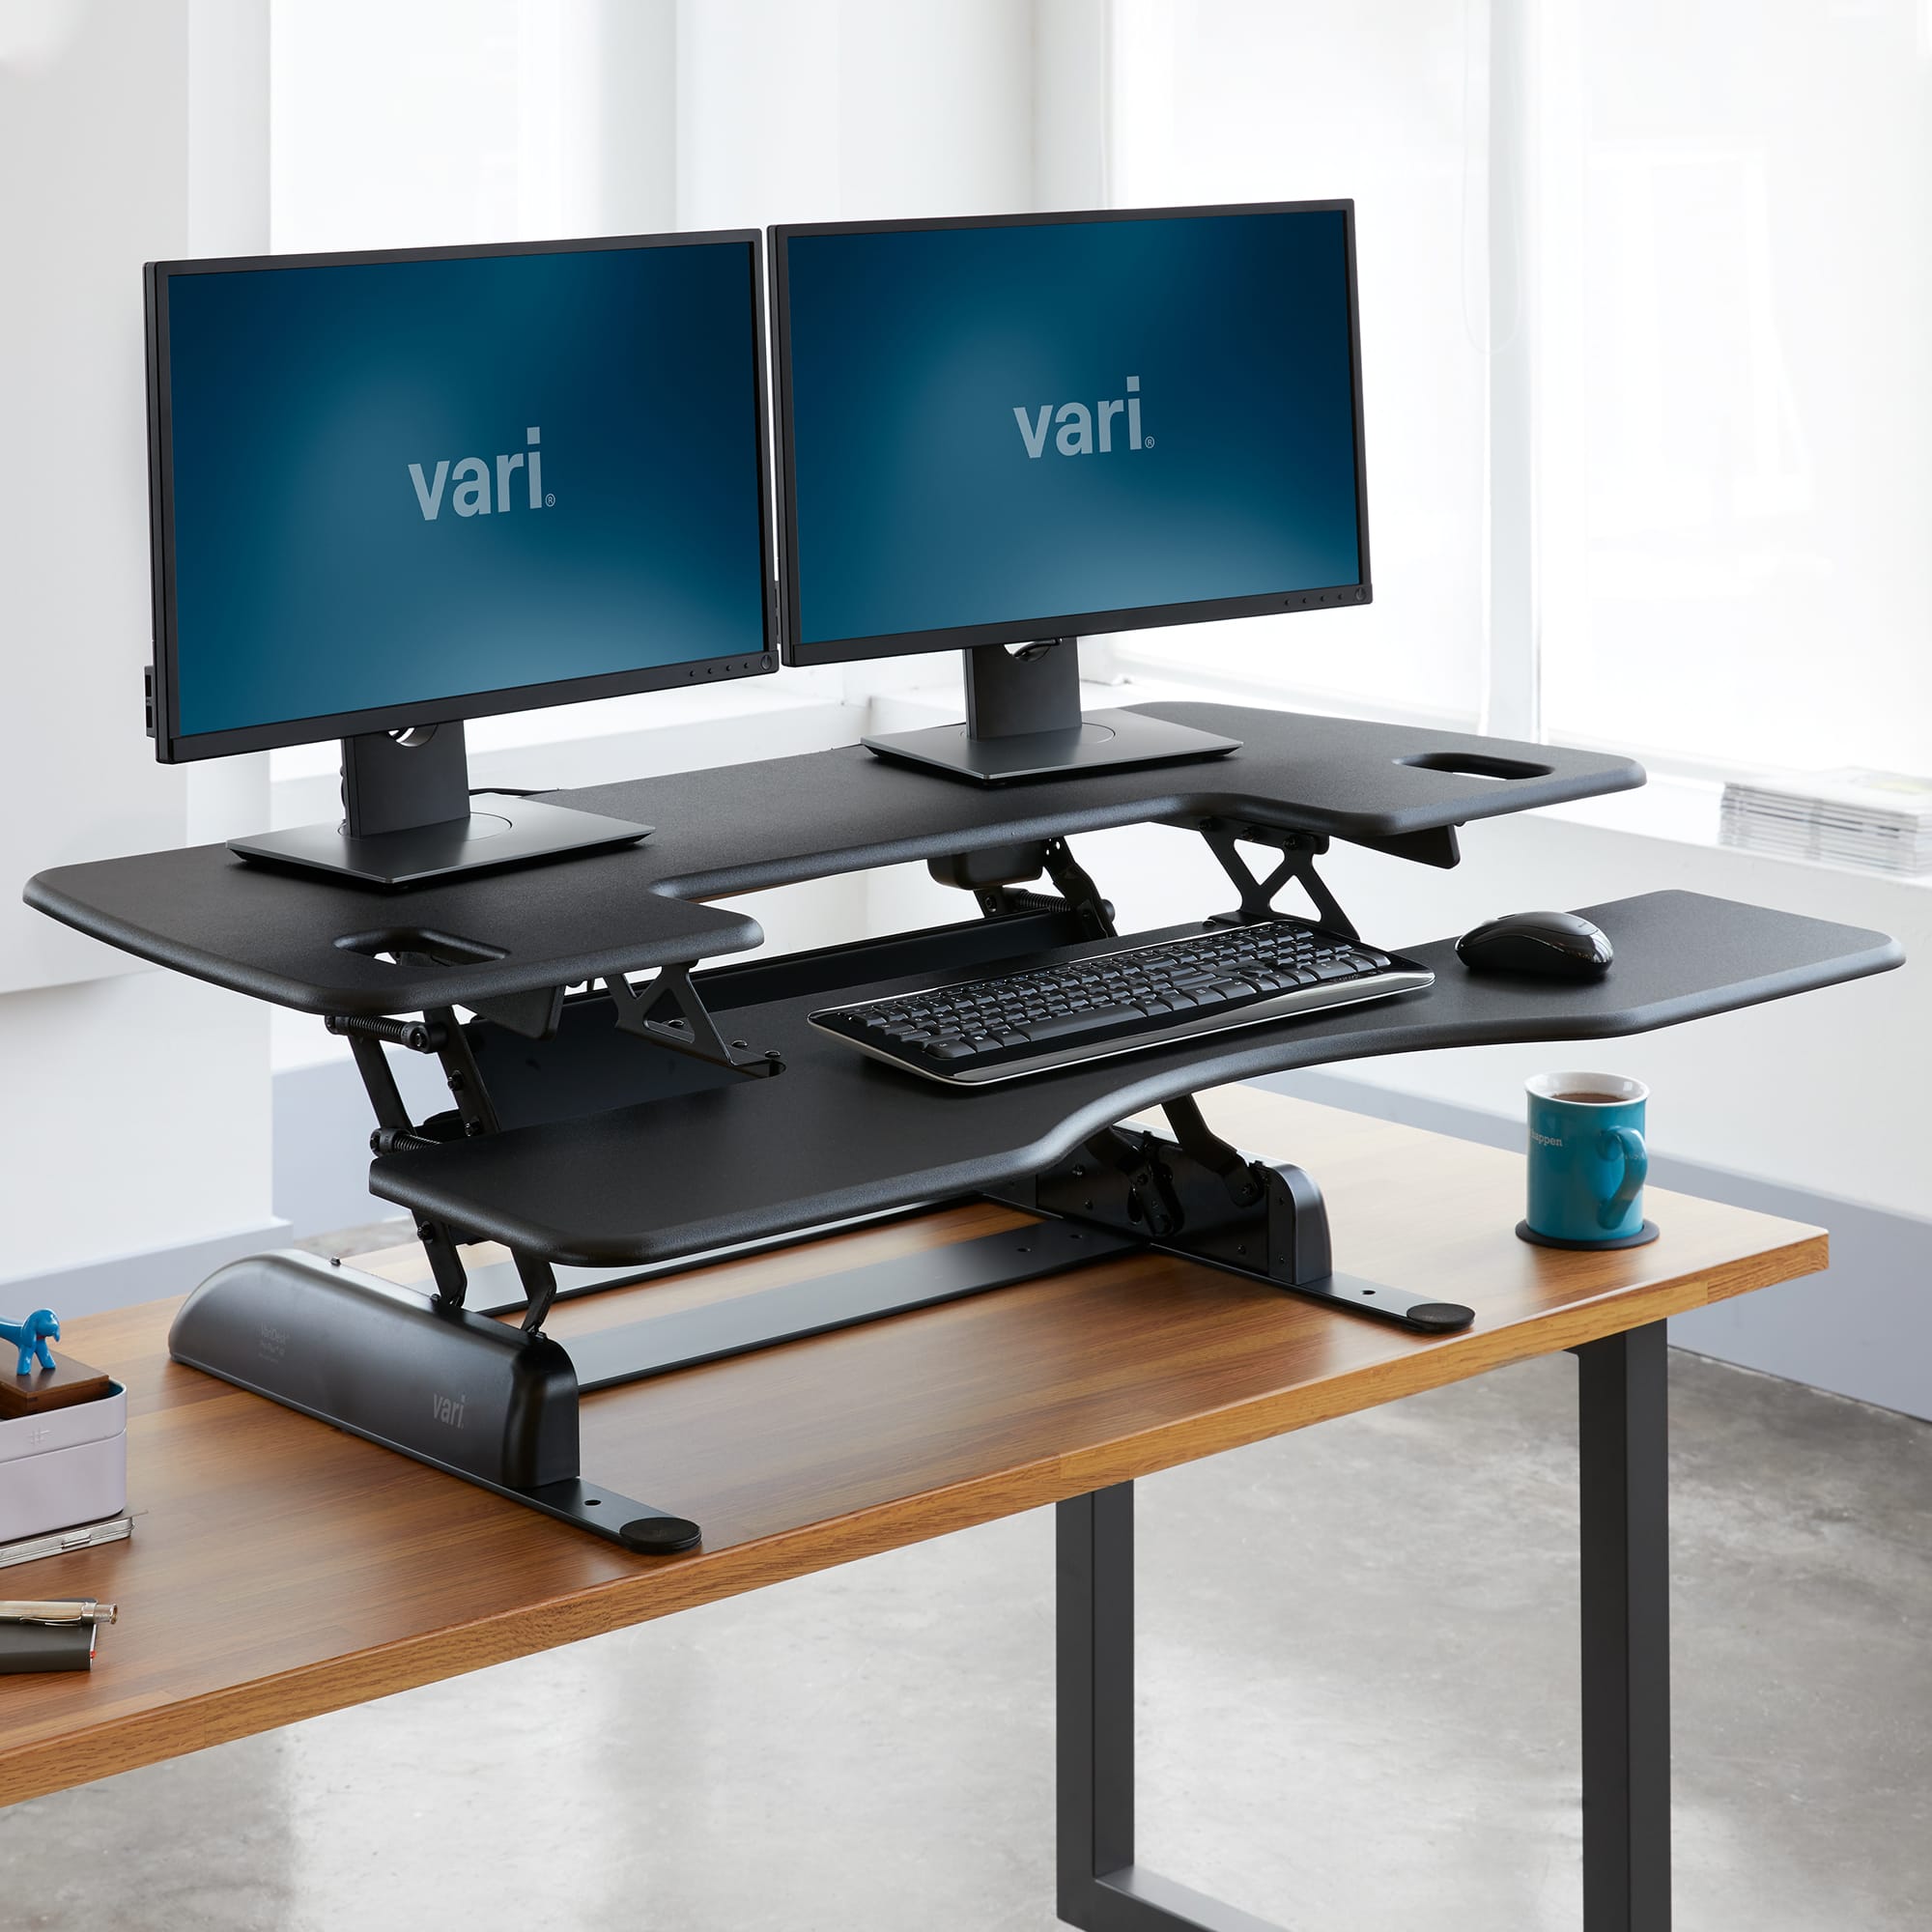 Vari ActiveMat - Anti Fatigue Mat for Standing Desk - Standing Desk  Accessory for Office, Home, or Gaming - Ergonomic Standing Mat for Comfort  